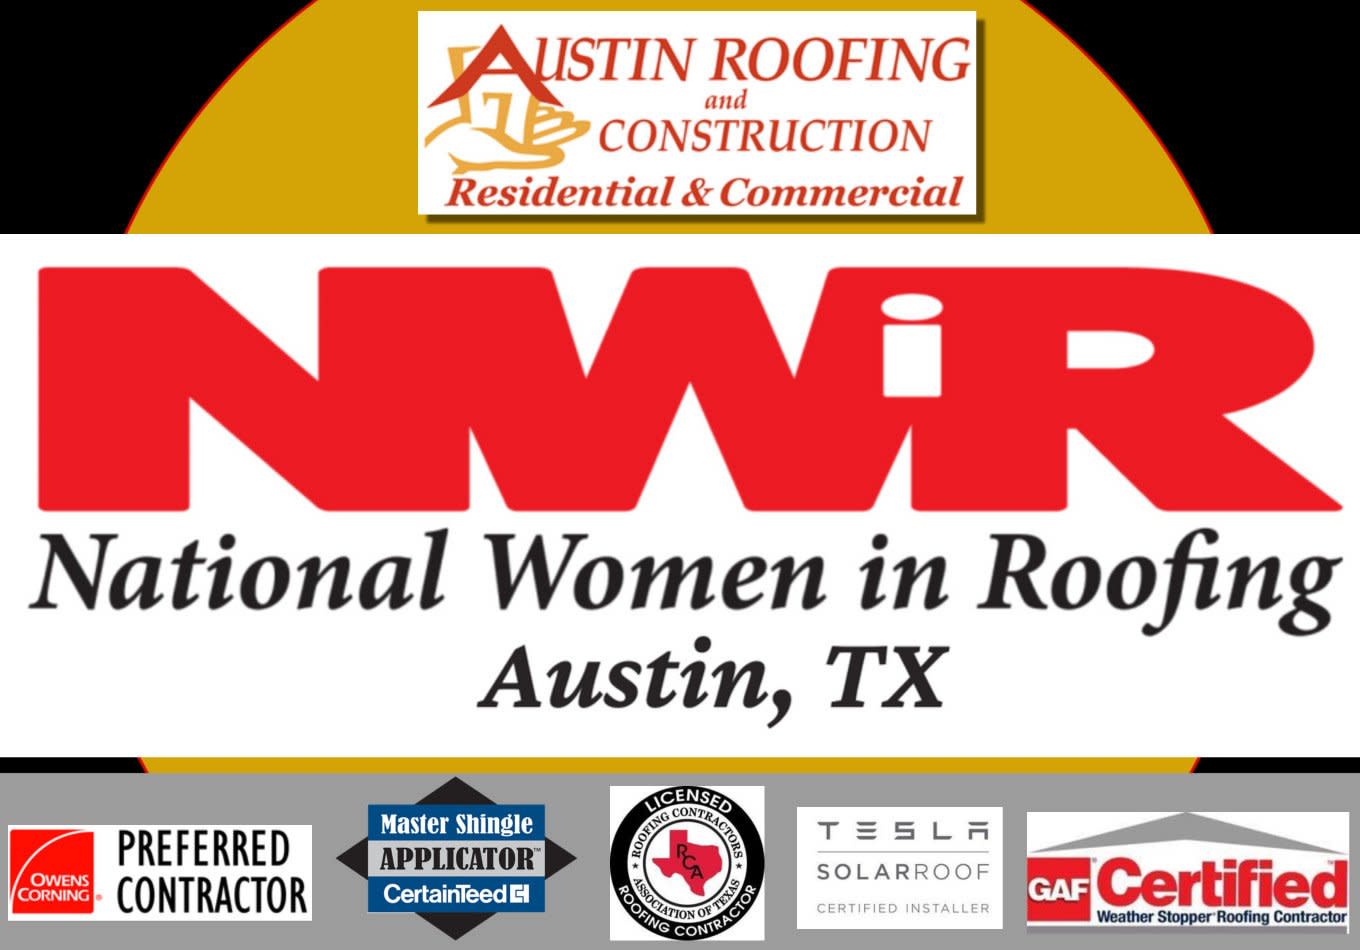 Austin Roofing Firm, Austin Roofing and Construction, Provides the New Austin Texas Council for Women of all ages in Roofing